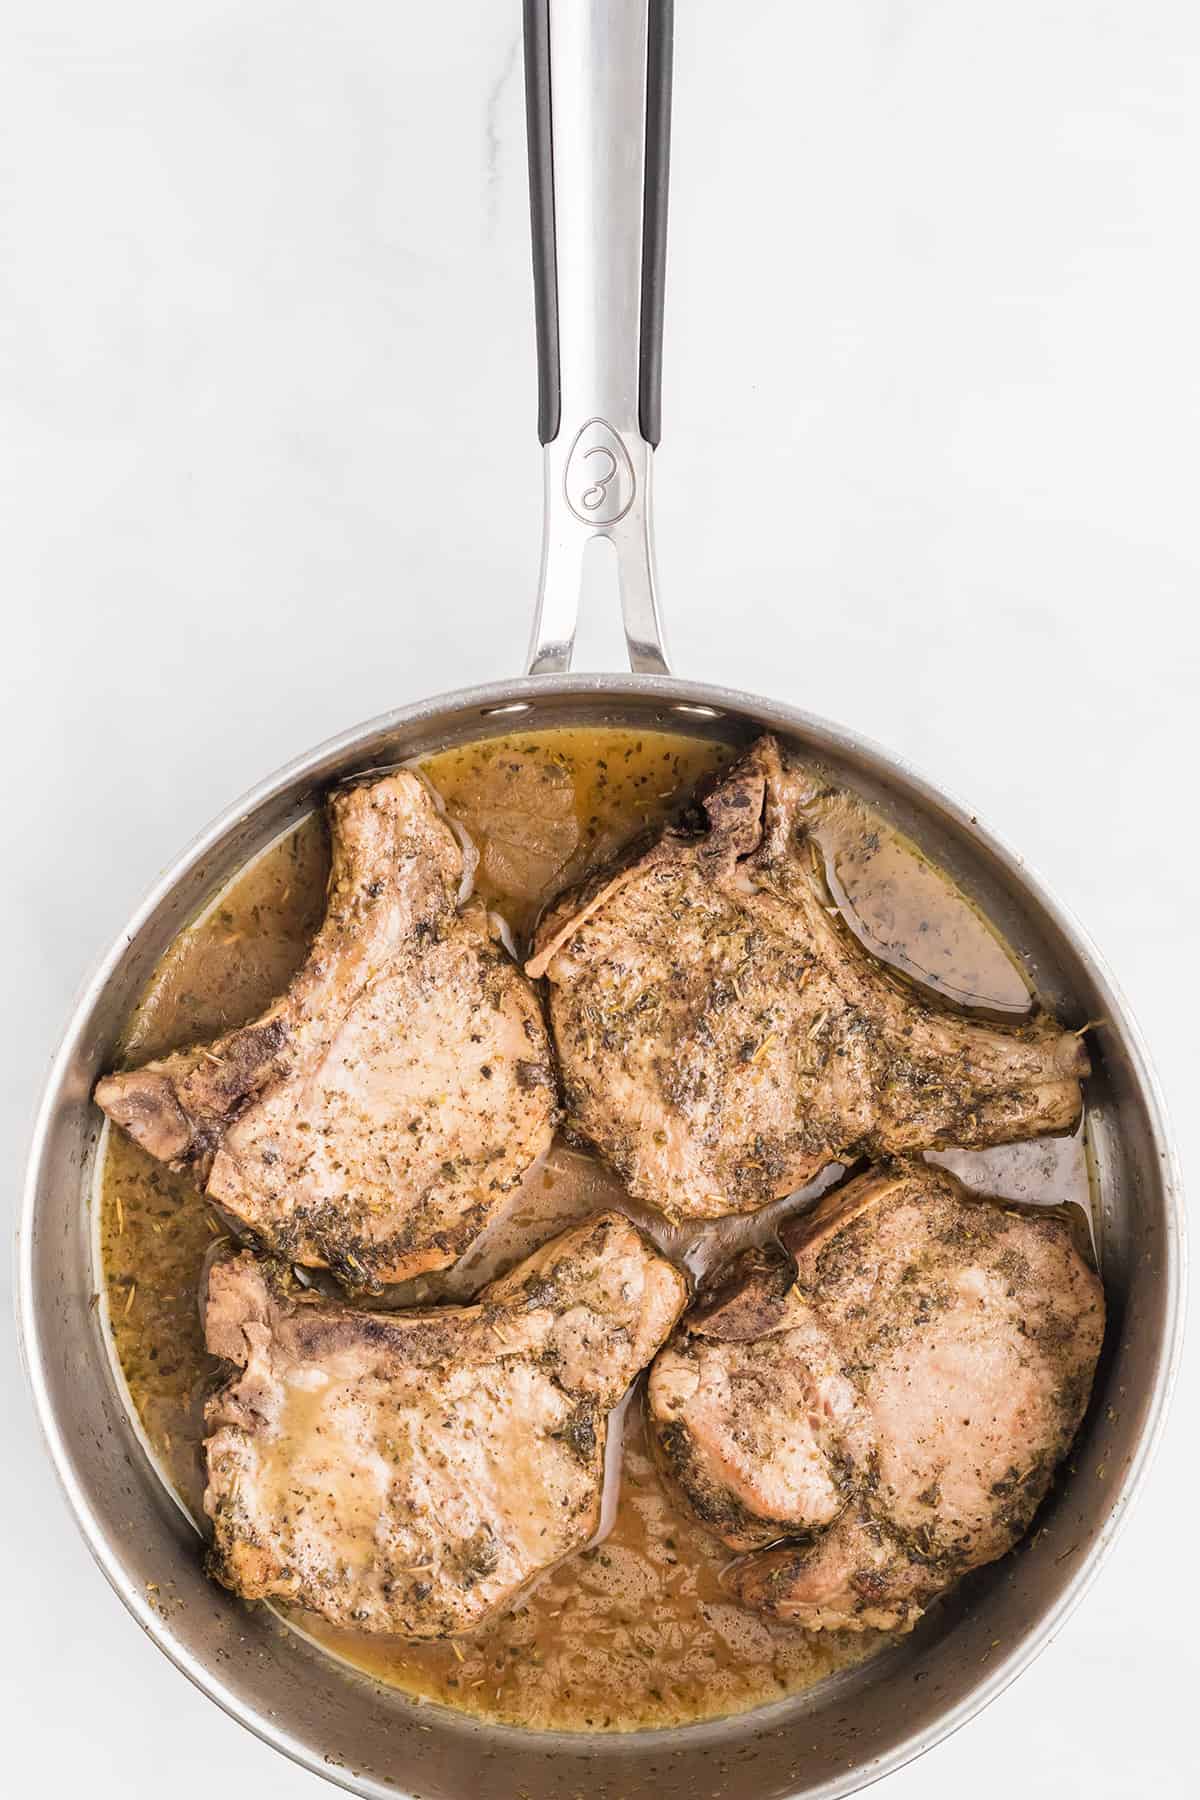 Chicken stock added to the pork chops in a skillet.